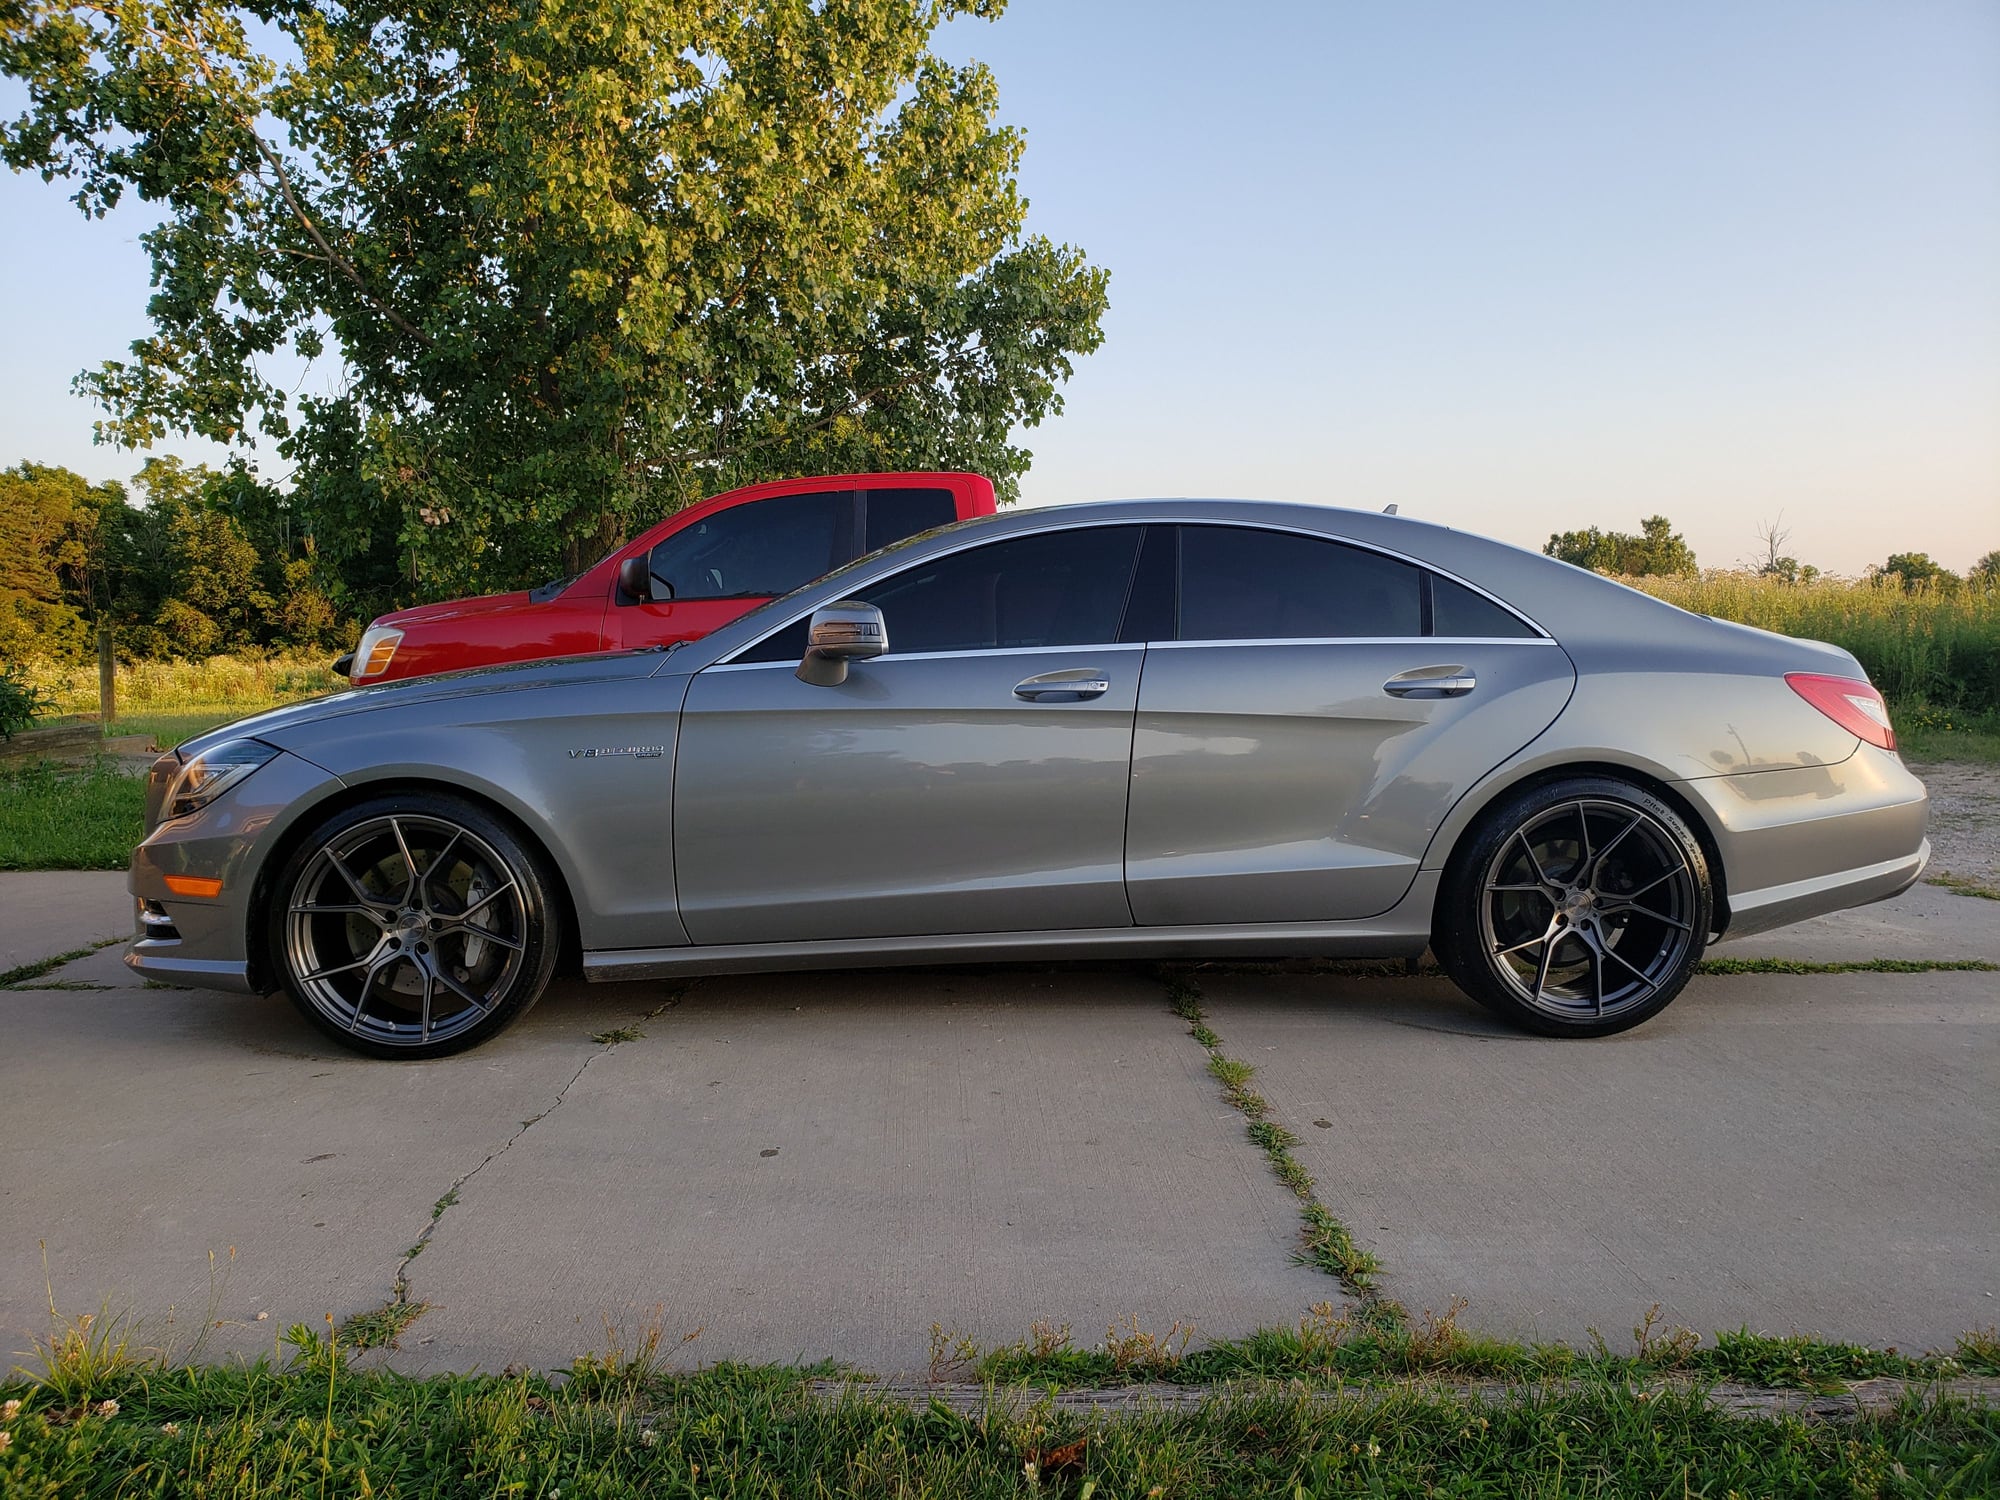 2012 Mercedes-Benz CLS550 - F/S 2012 CLS550 - Used - VIN WDDLJ9BB1CA027497 - 43,348 Miles - 8 cyl - AWD - Automatic - Sedan - Gray - Lansing, MI 48917, United States